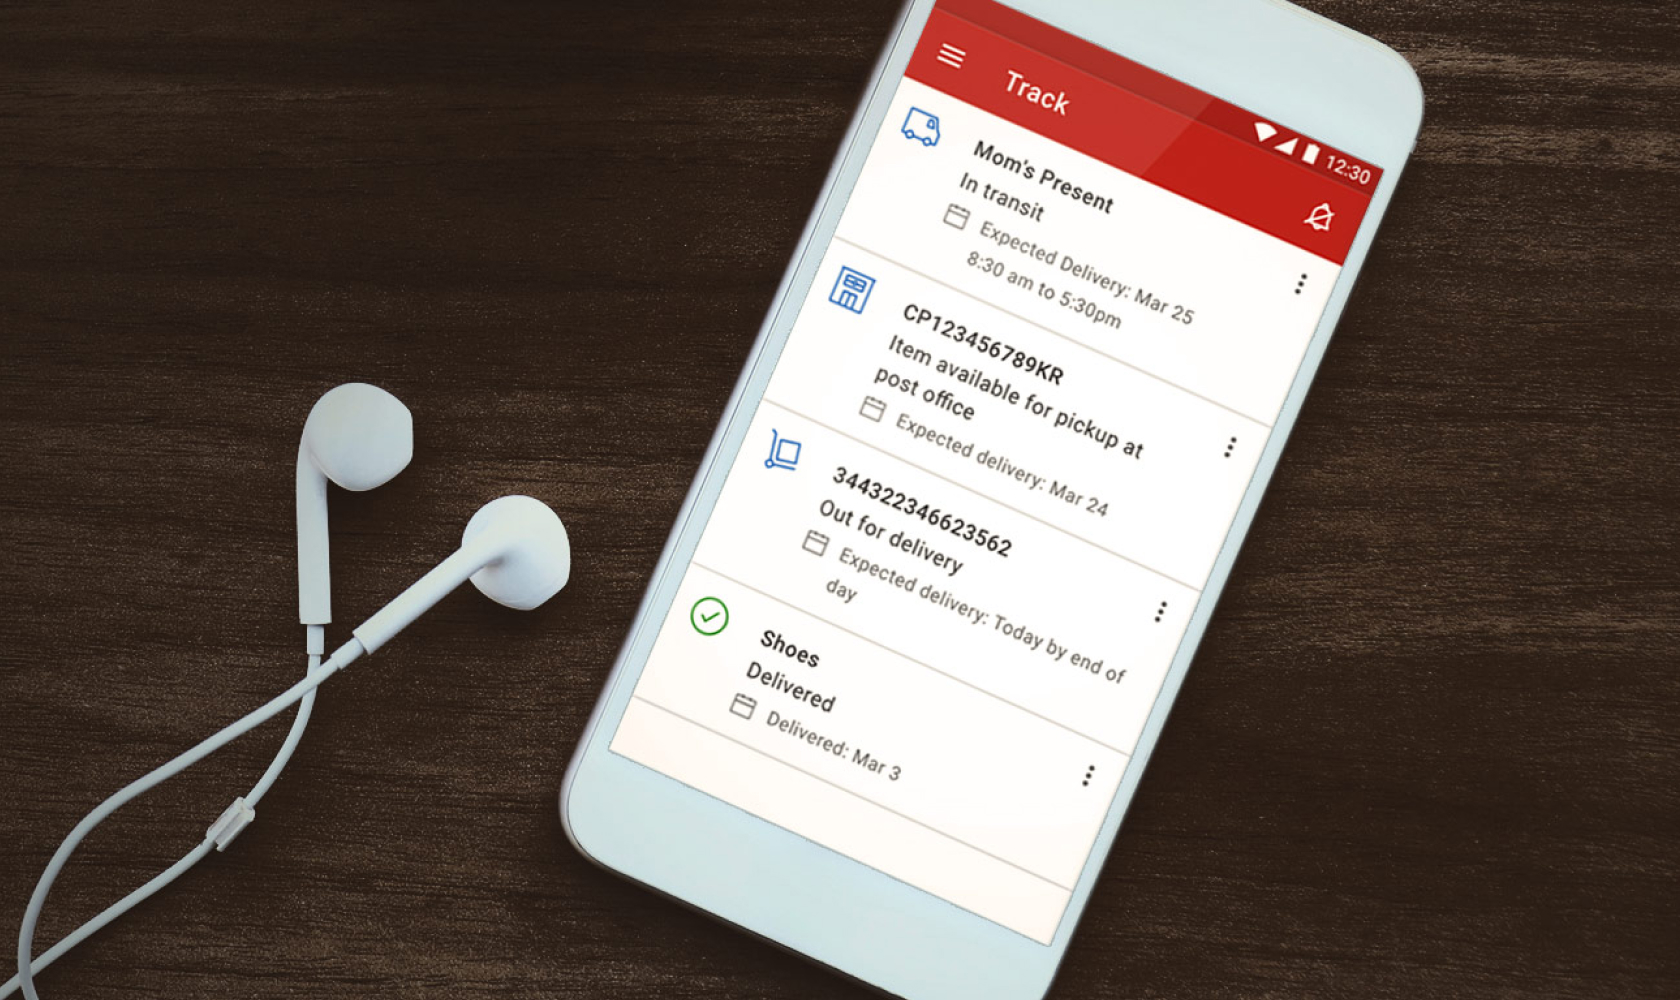 A cellphone is used to track multiple shipments in the Canada Post app. Earbuds rest beside the phone.